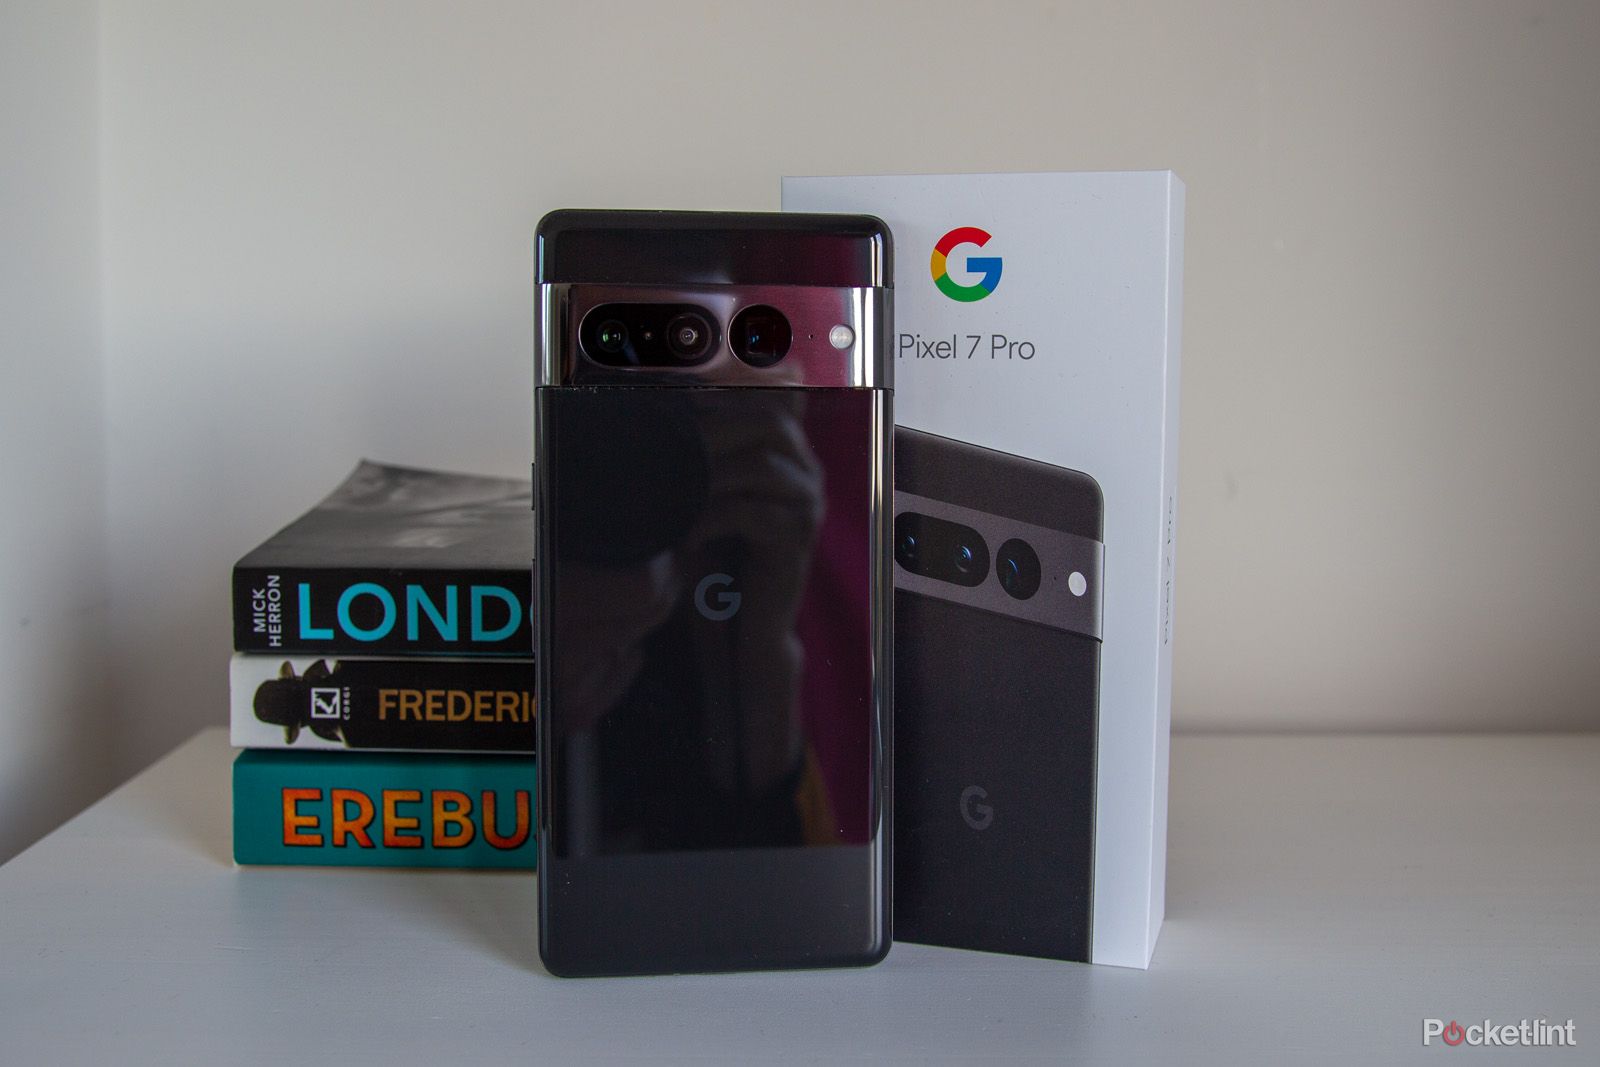 Google Pixel 7 Pro in black leaning against its box